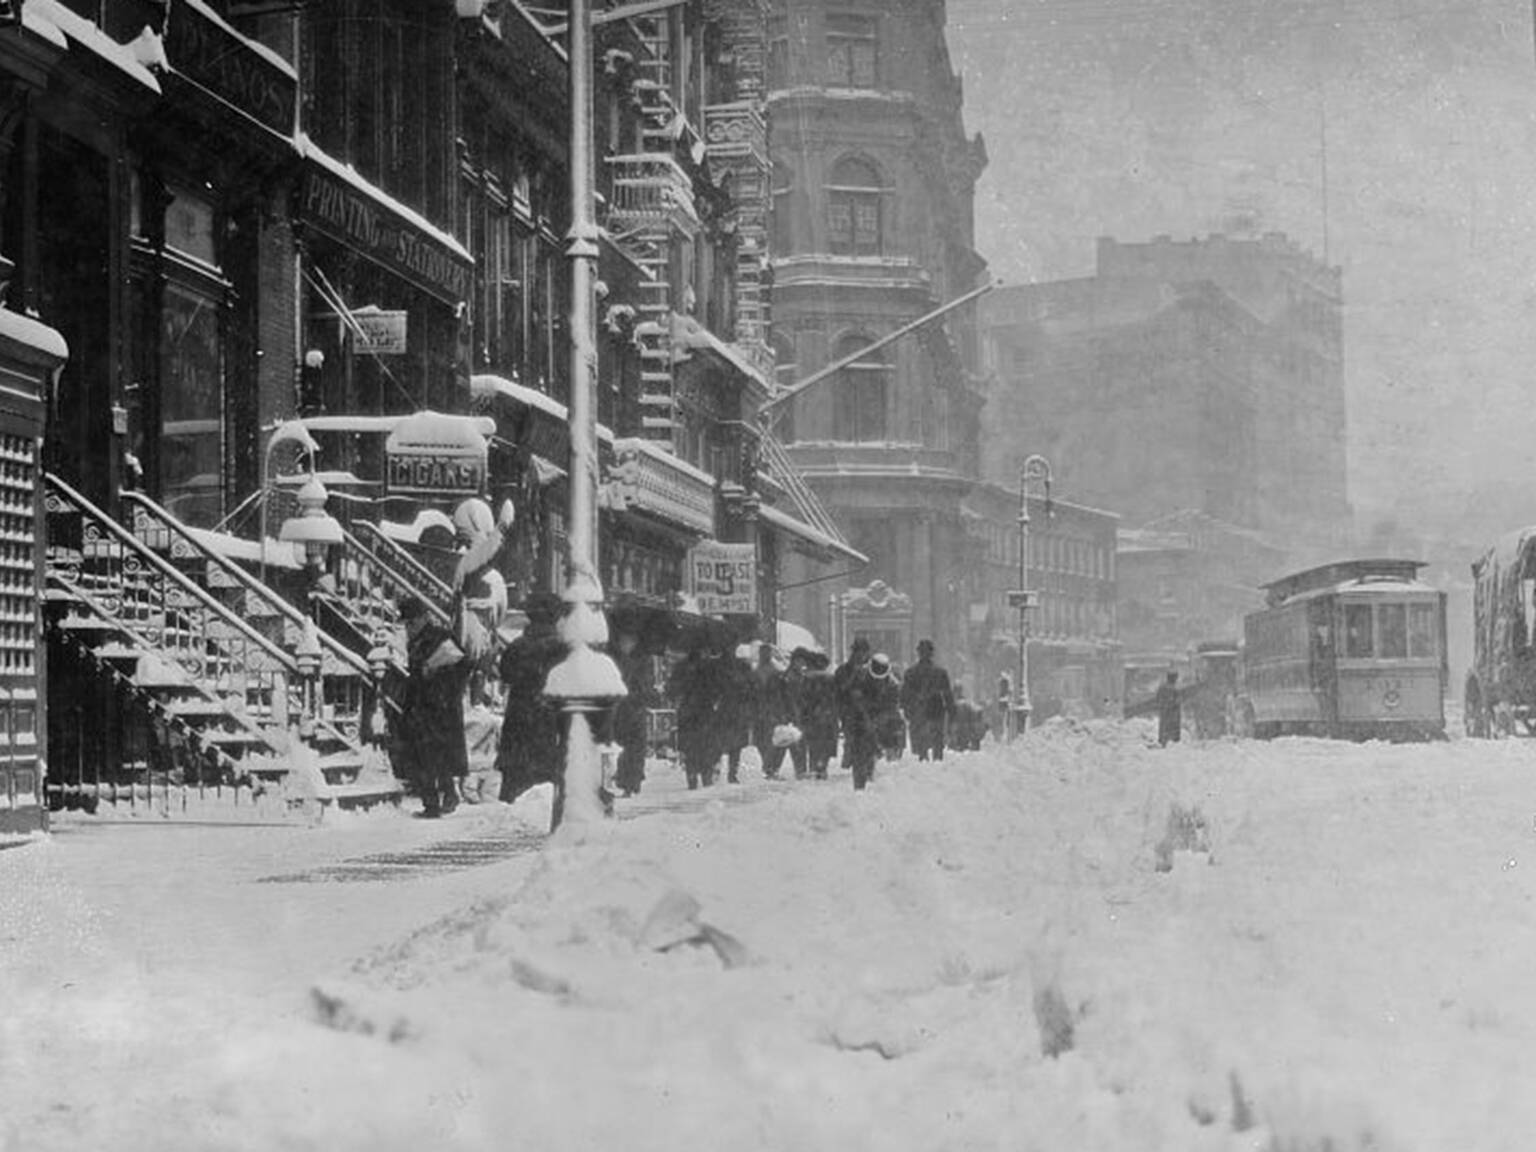 See photos of NYC in snowstorms through the decades